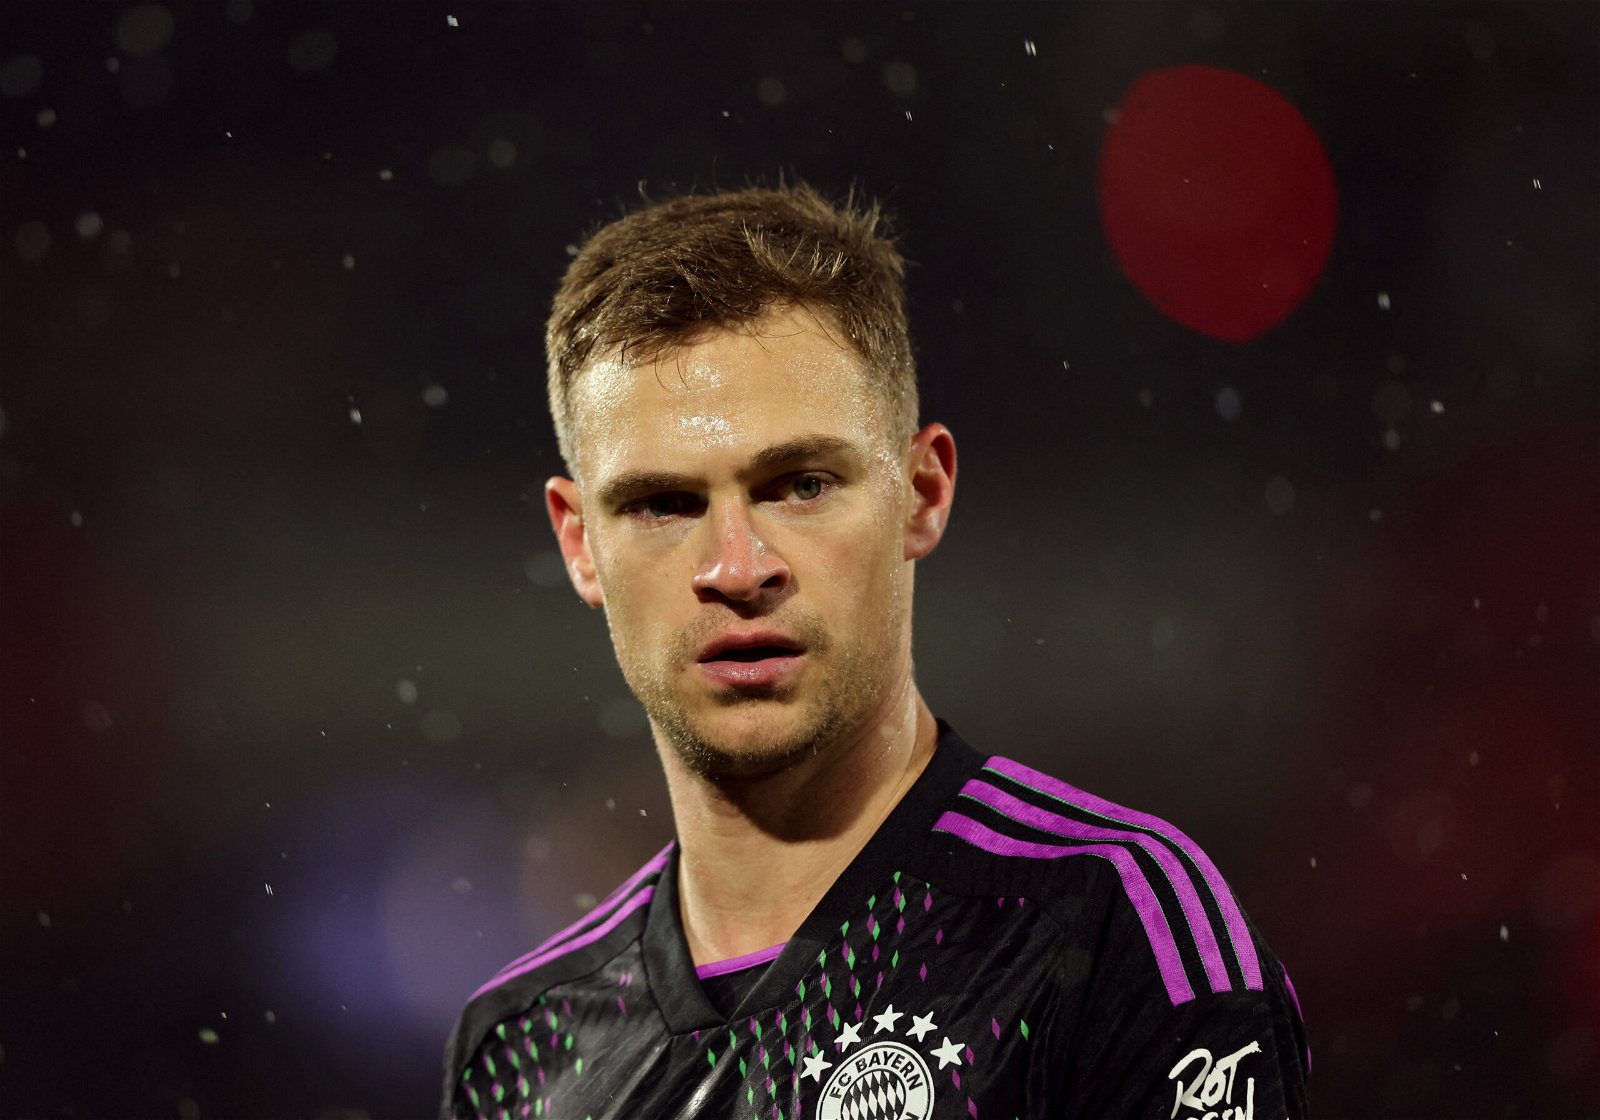 Joshua Kimmich is one of the highest paid players in Bundesliga